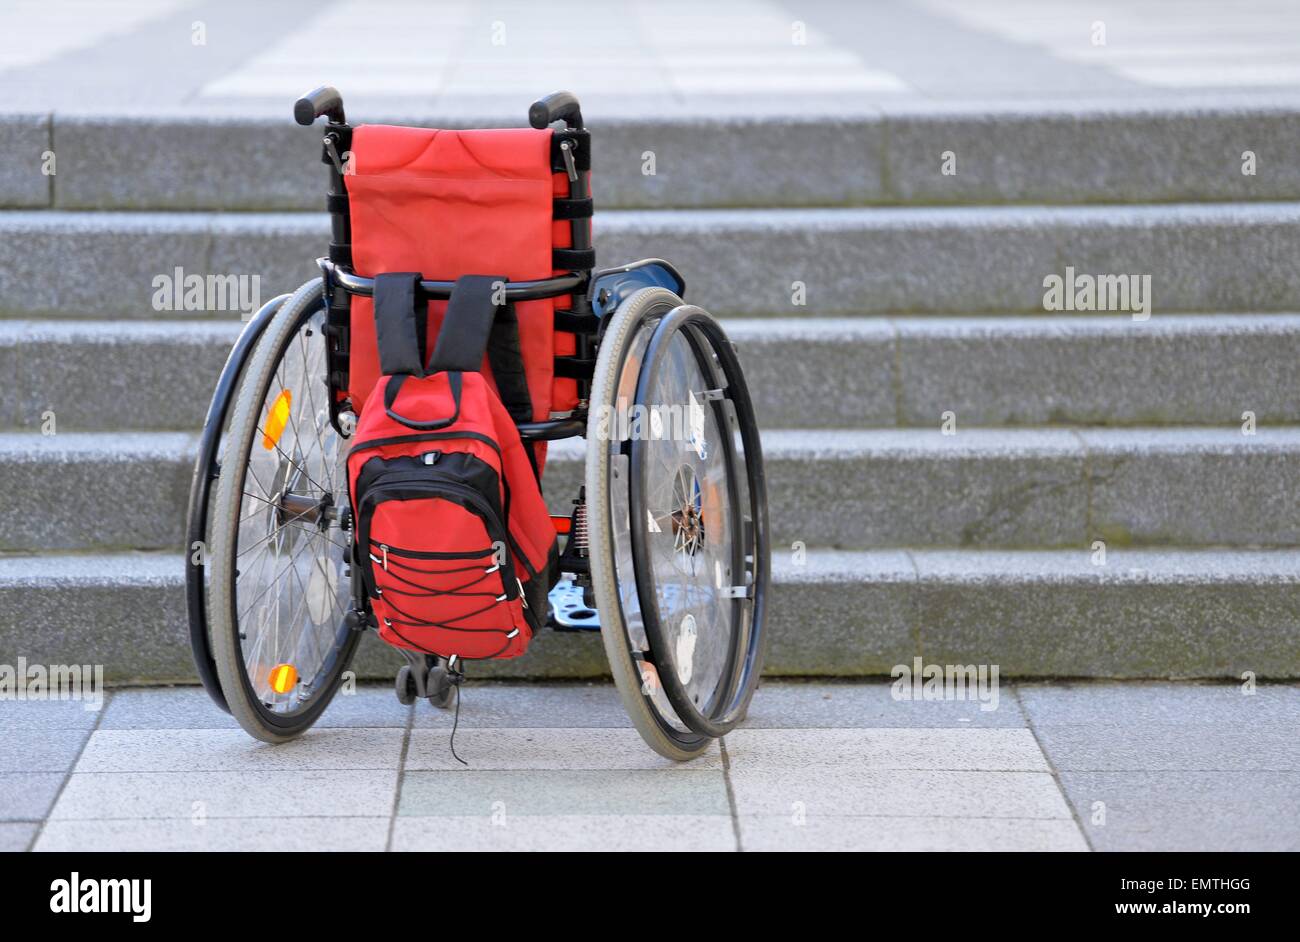 Wheelchair infront of steps./picture alliance Stock Photo